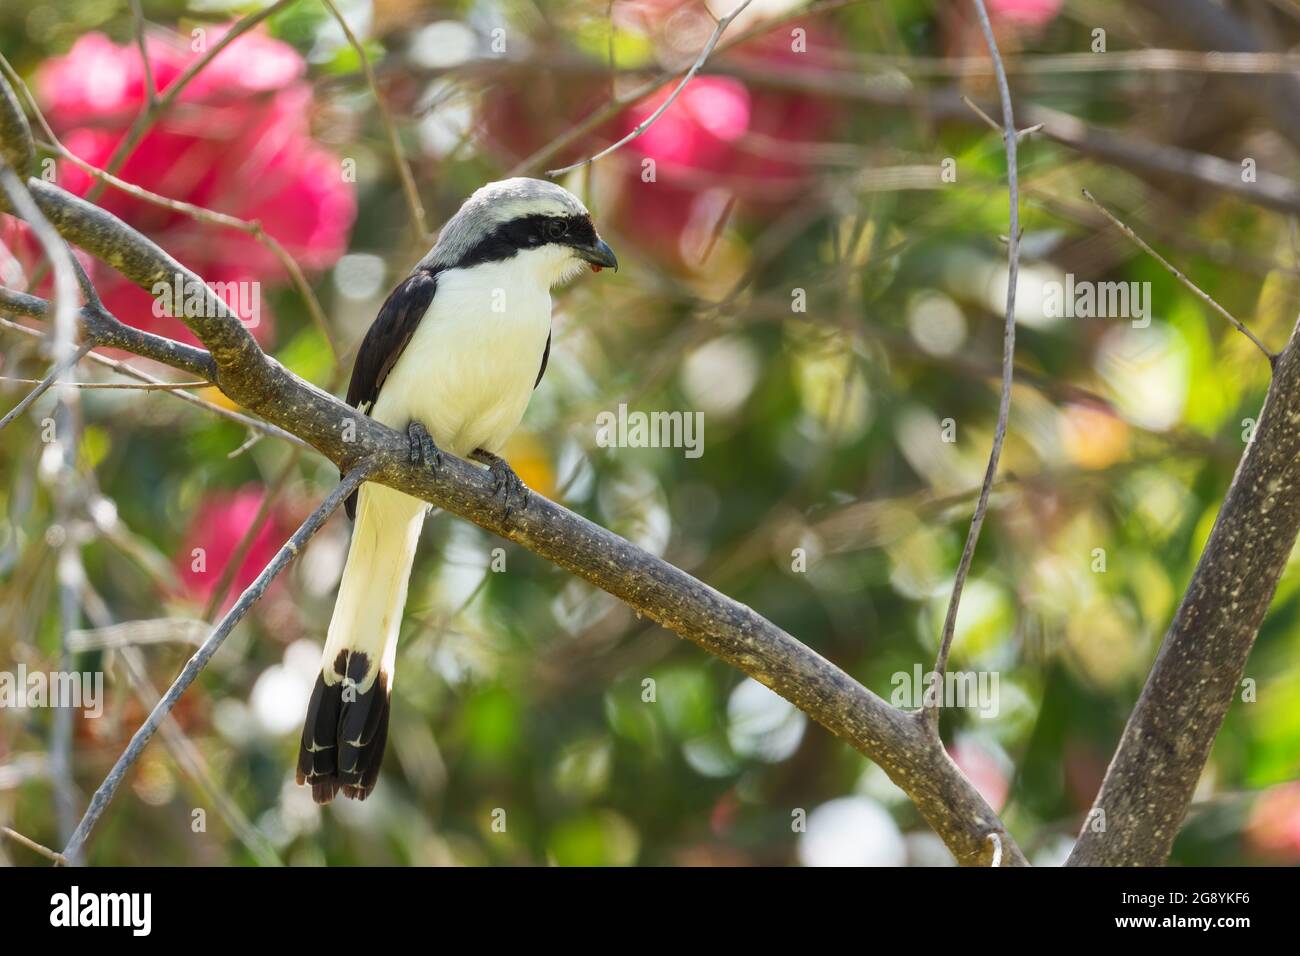 Grey-backed Fiscal - Lanius excubitoroides, beautiful large perching bird from African bushes and woodlands, lake Ziway, Ethiopia. Stock Photo